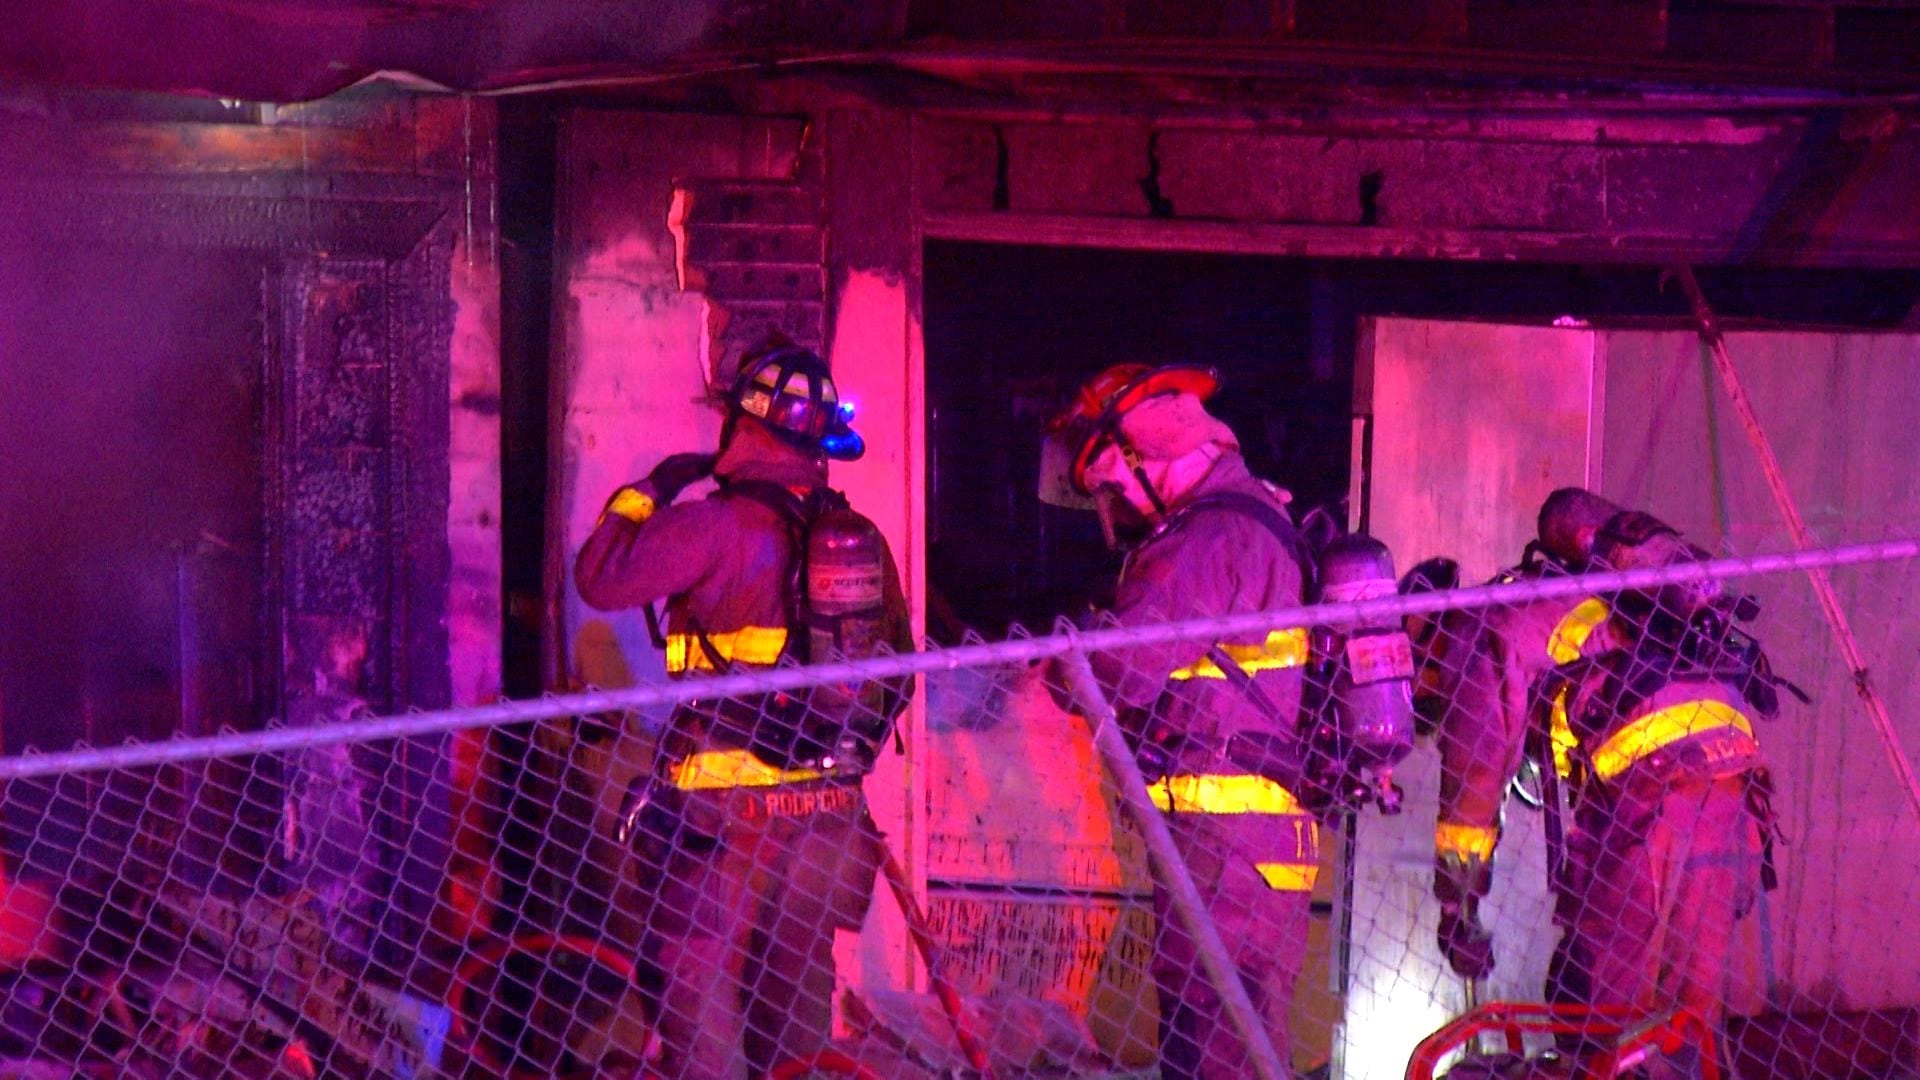 Overnight fire destroys home on far West Side, SAFD says